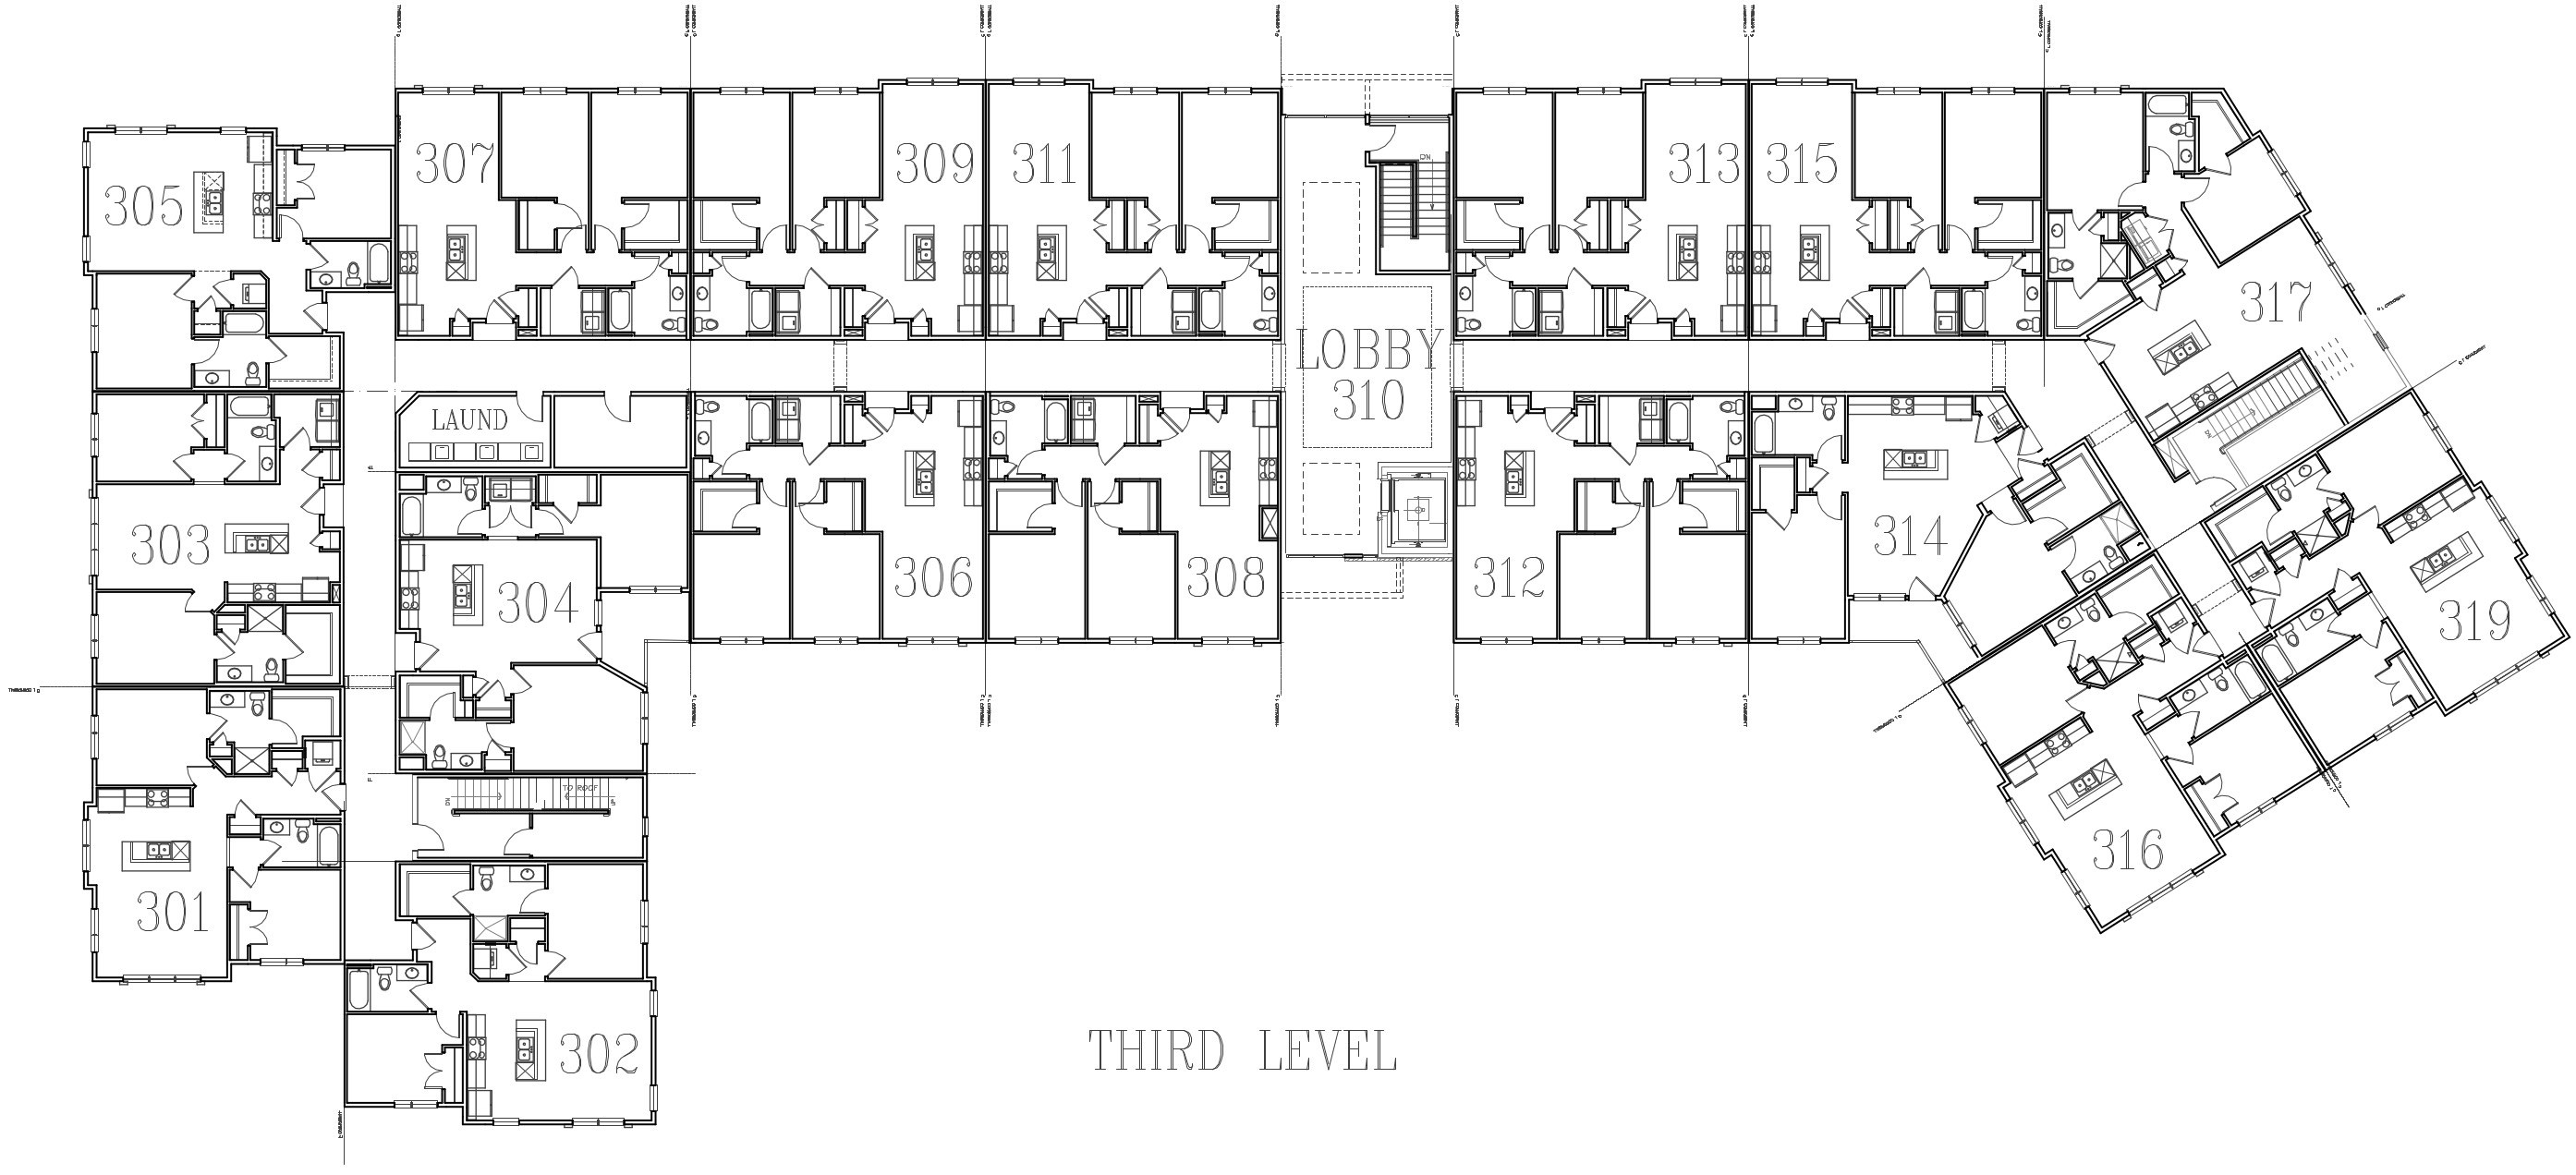 Image of building layout for third floor.